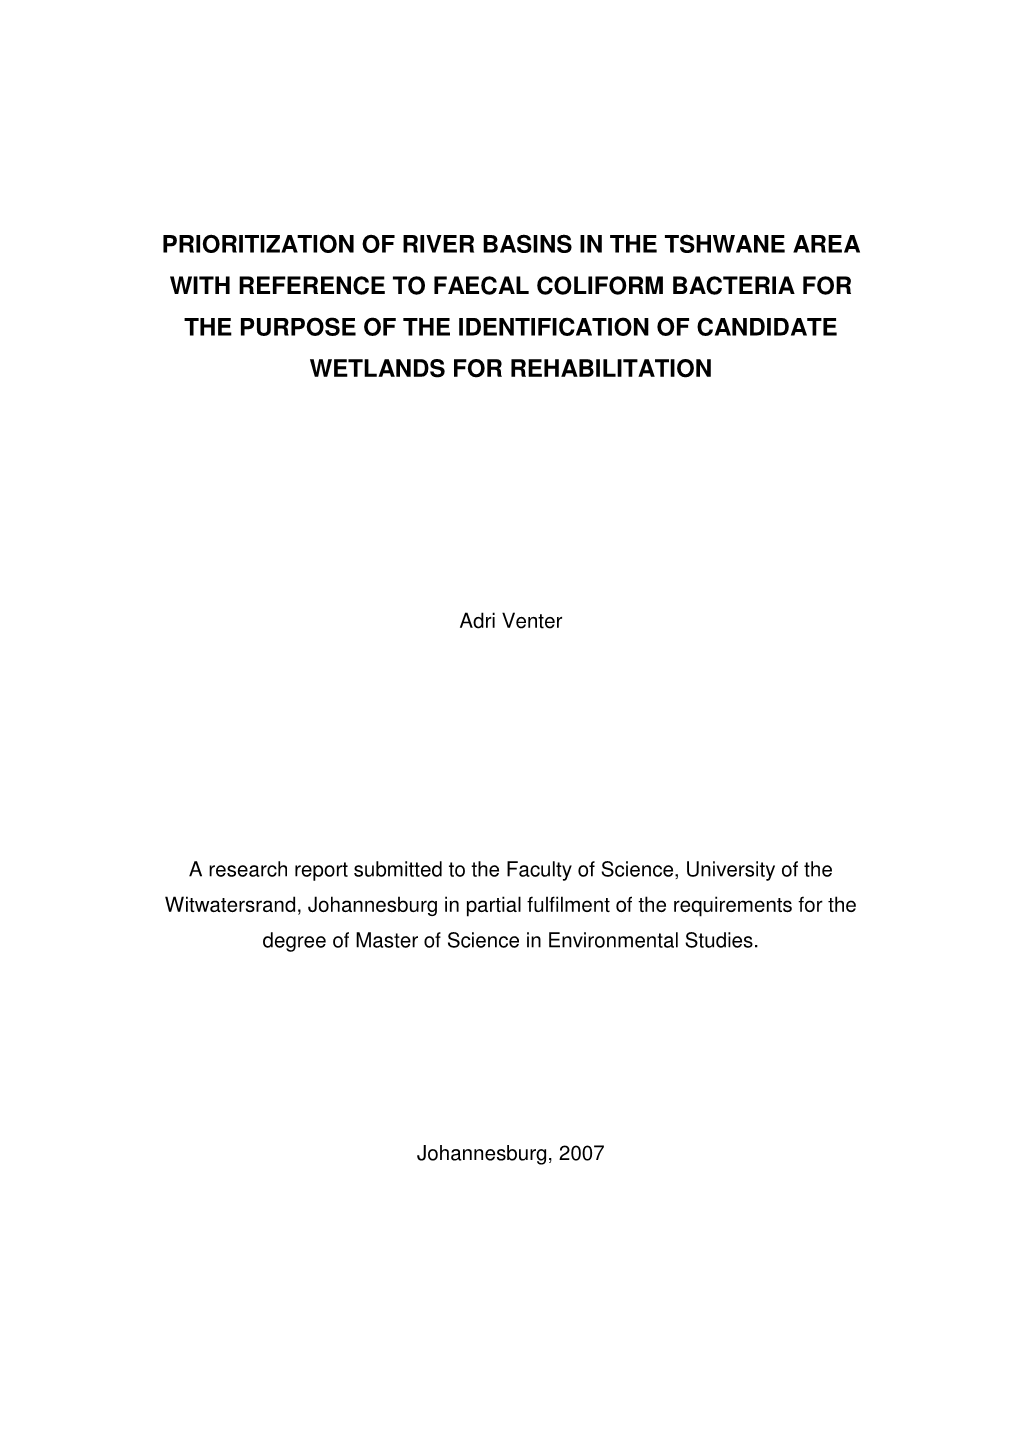 Prioritization of River Basins in the Tshwane Area With